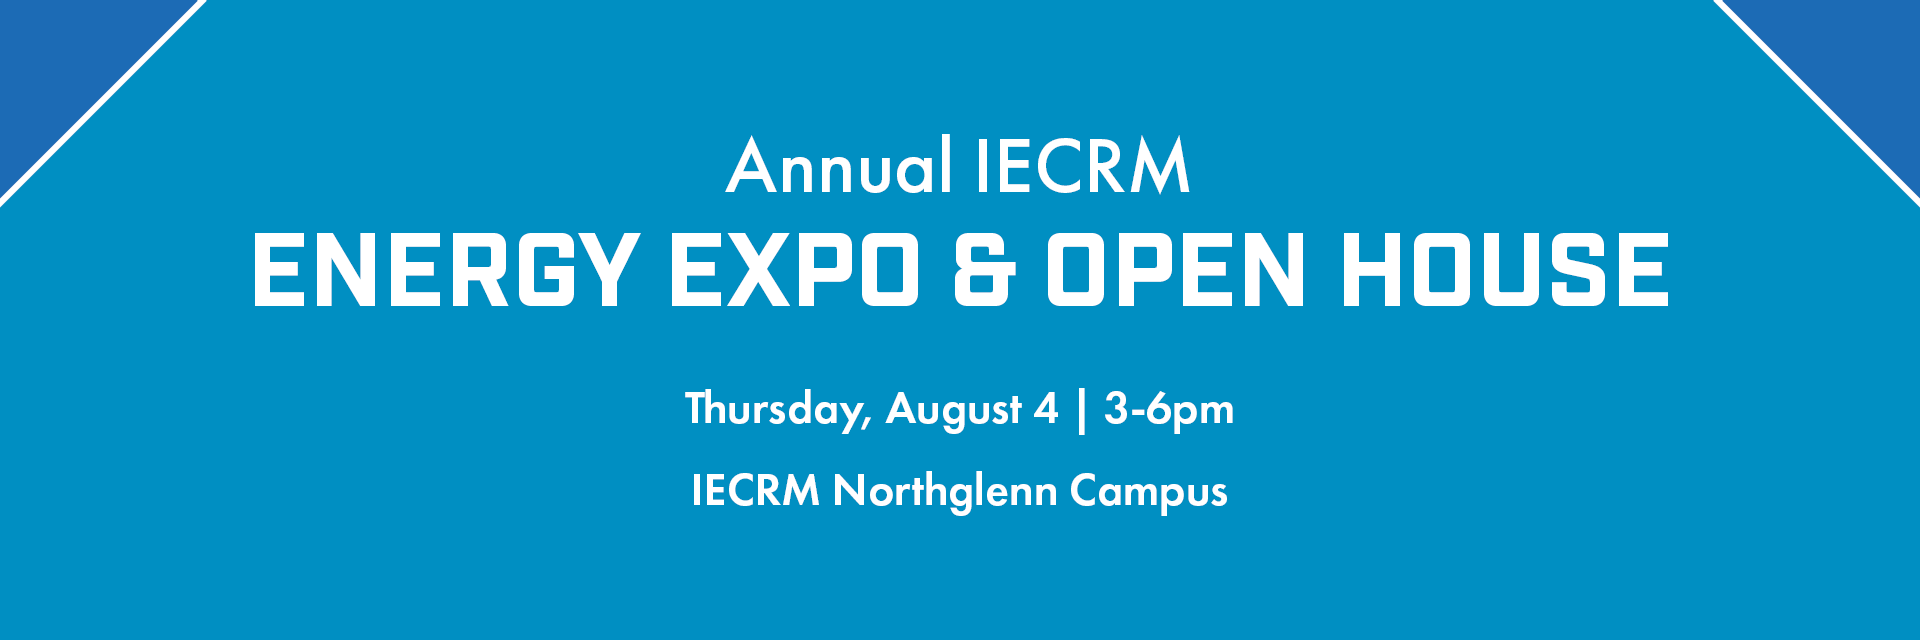 IECRM Energy Expo & Open House BOOTH Registration